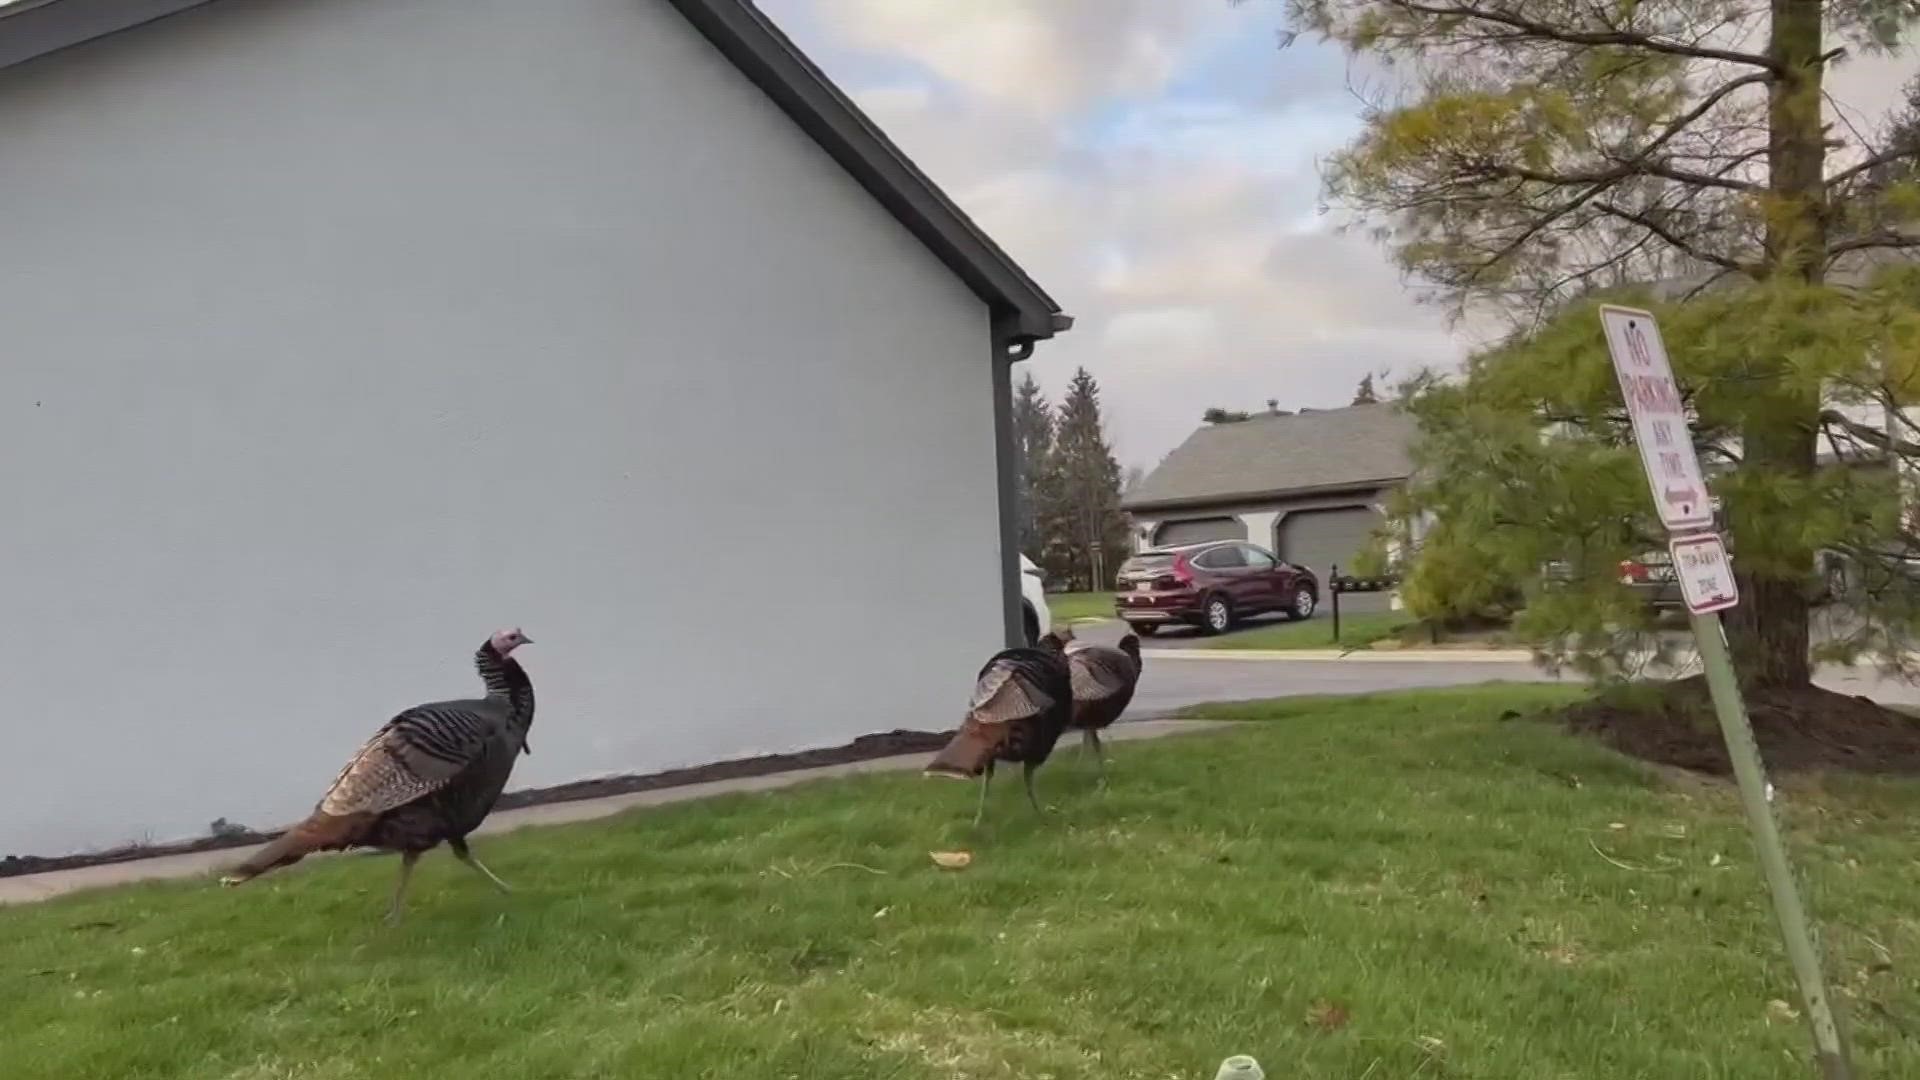 The turkeys, known as the “Hilliard Turkey Gang," have been running around neighborhoods in the city for about a year.